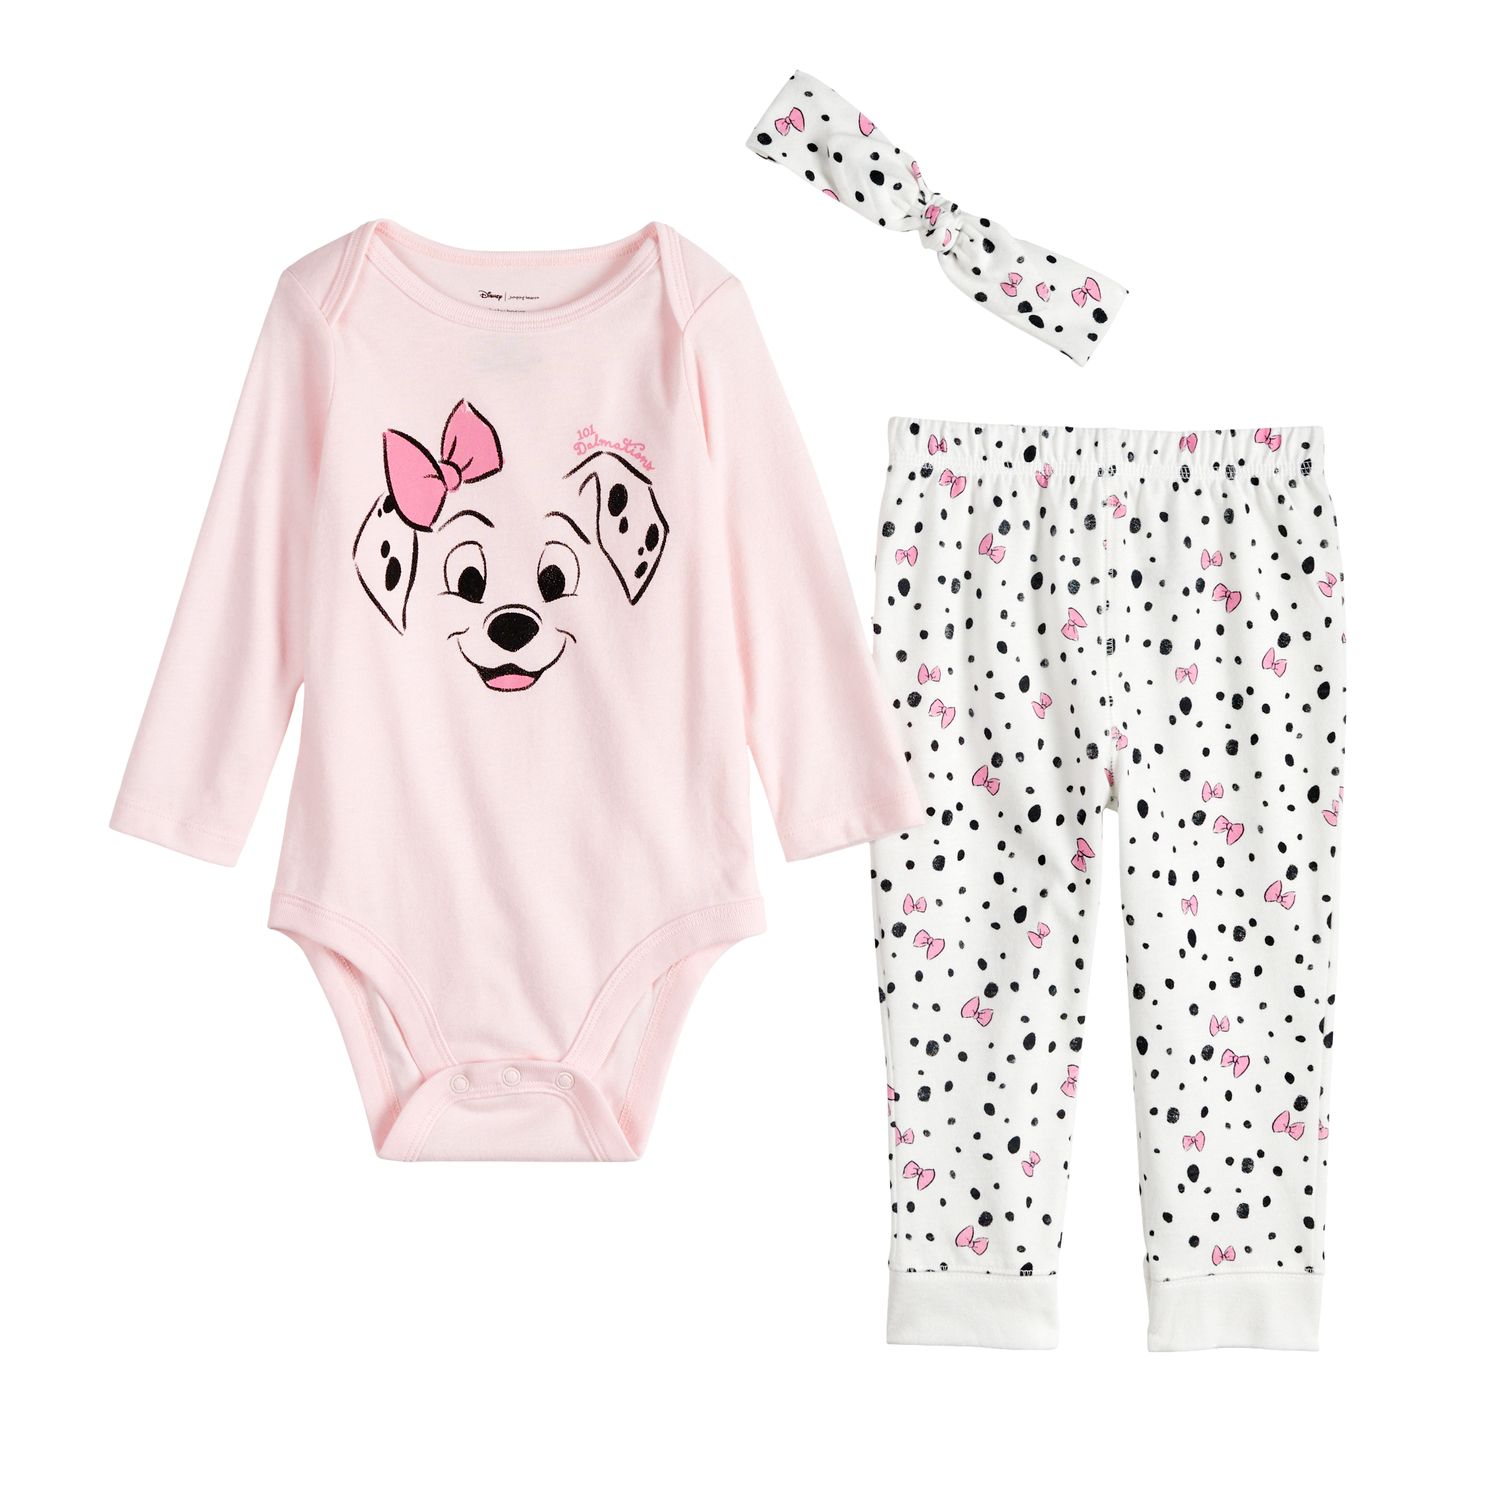 101 dalmatians baby outfit